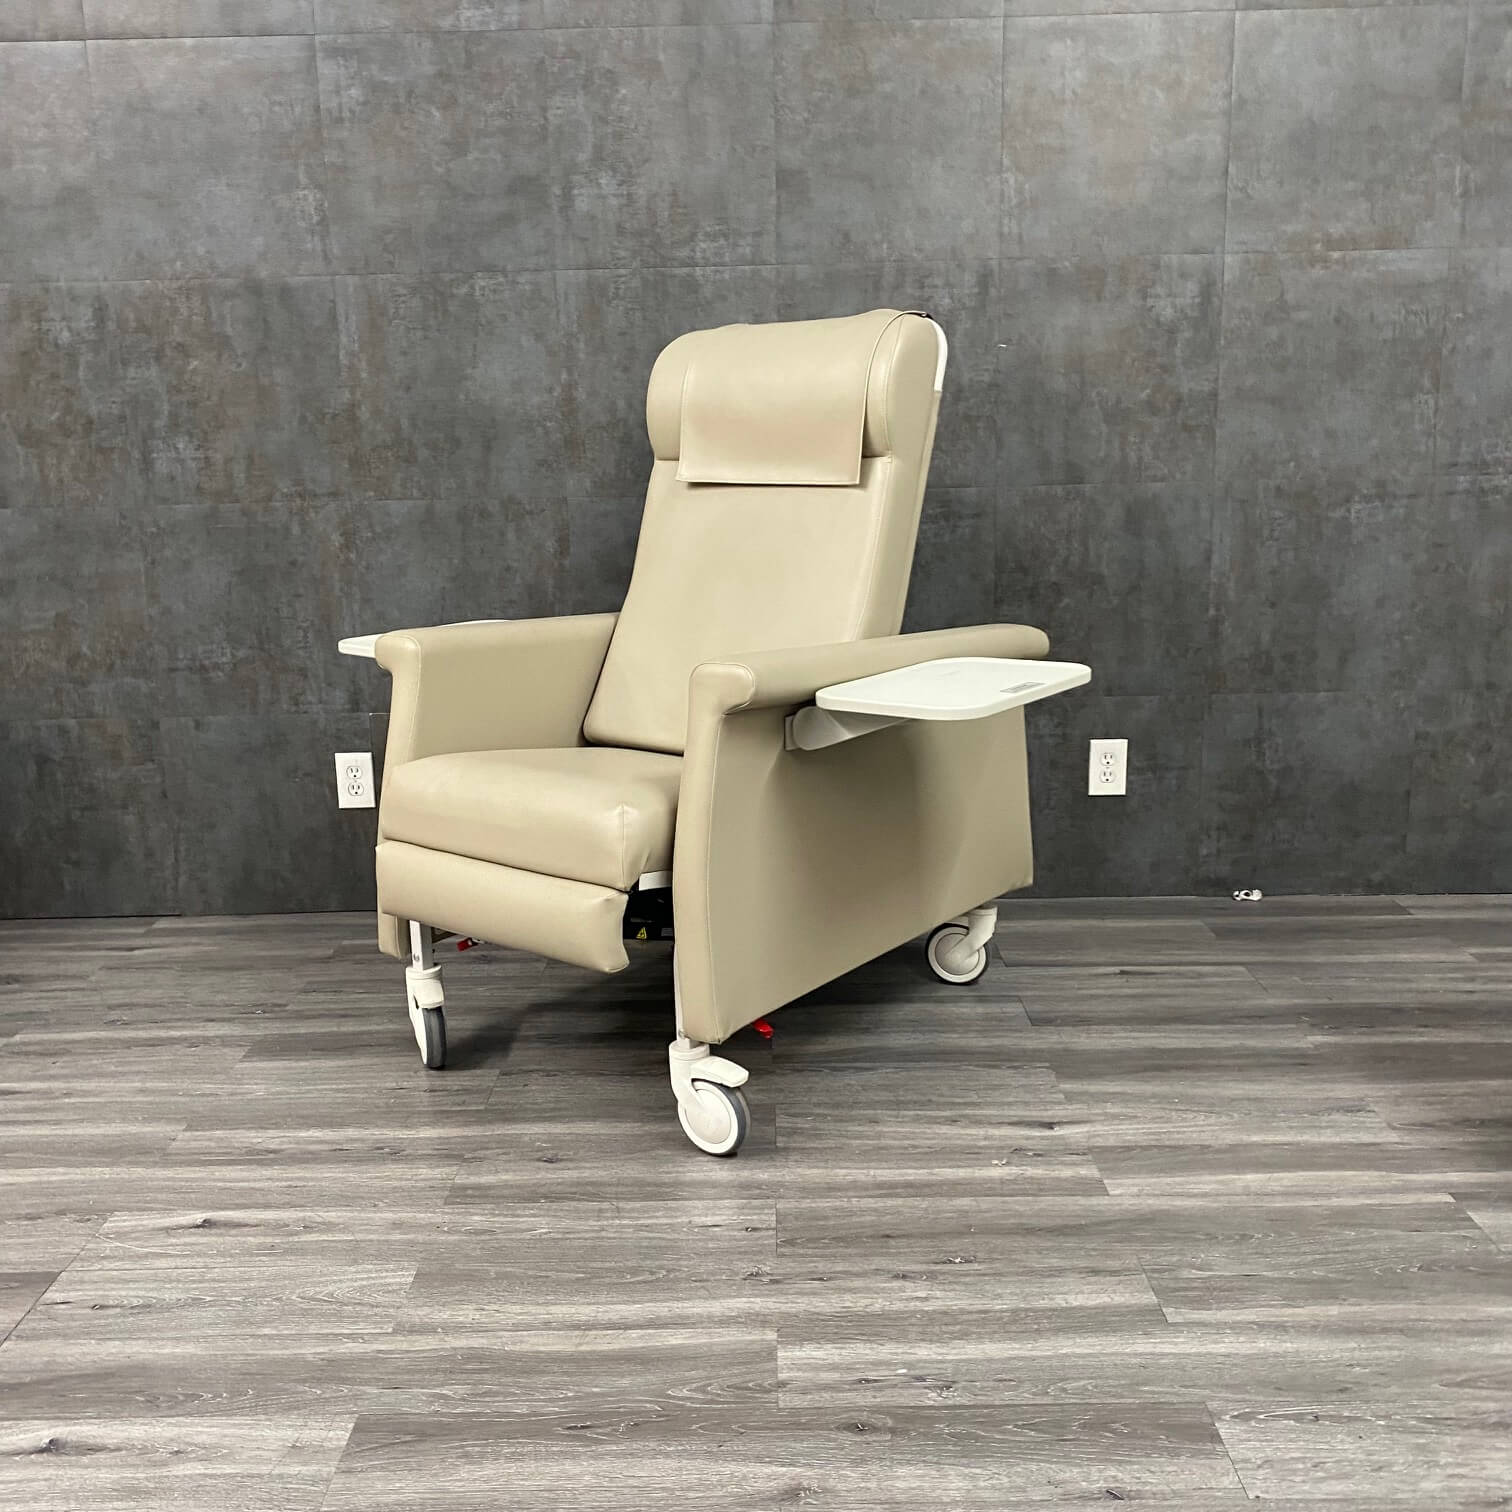 Winco 6940 Clinical Recliner with Swing Arms